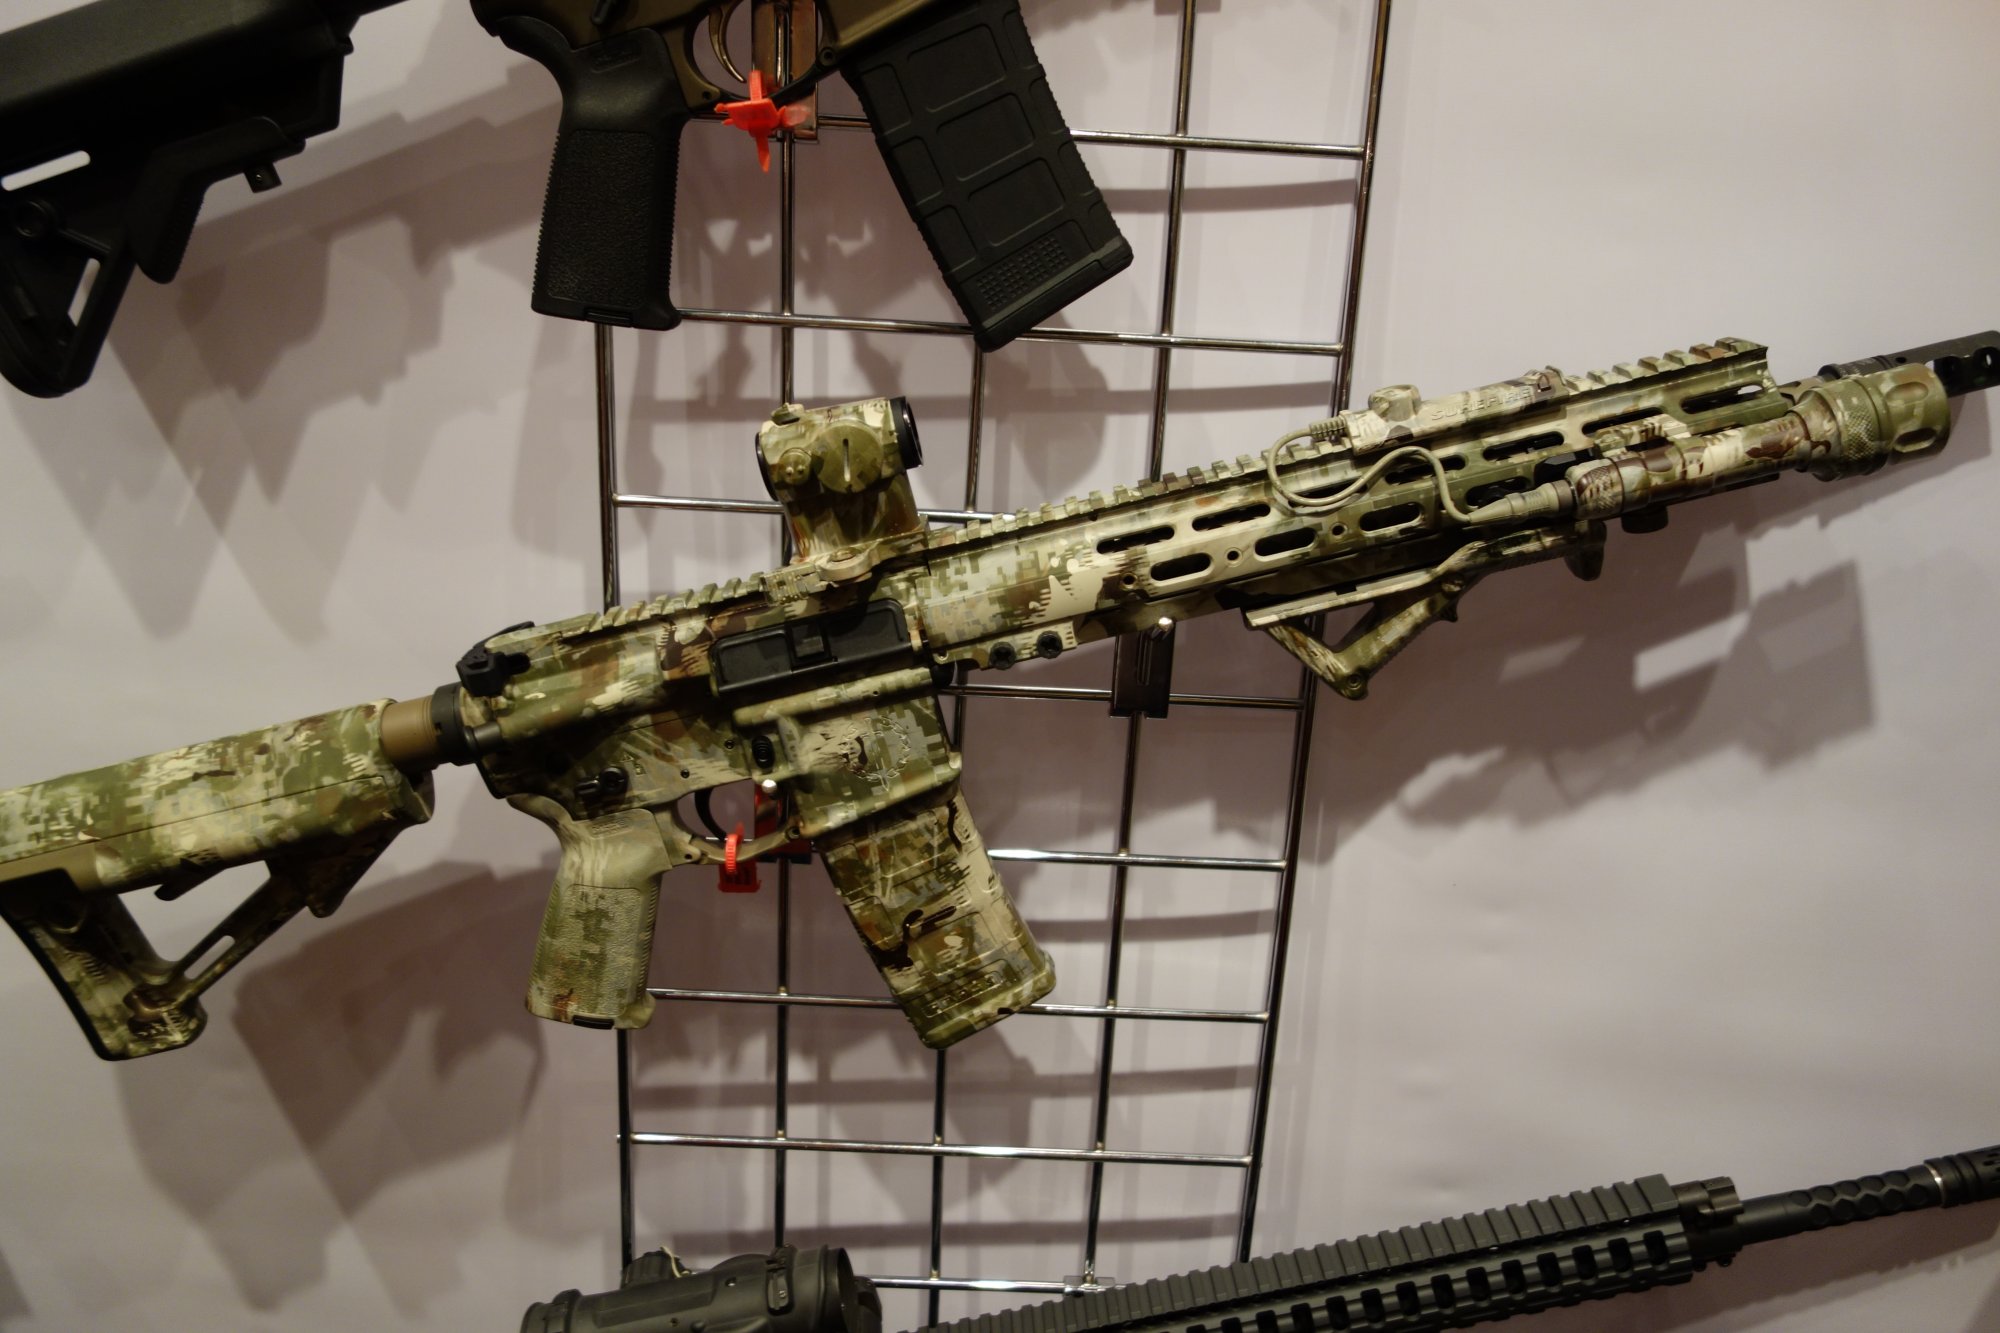 Legion_Firearms_LF-4D_Orion_Design_Group_ODG_Edition_Lupus_Camouflage_Pattern_Signature_Series_5.56mm_Tactical_AR-15_Carbine_Rifle_with_HEX-Fluted_Barrel_at_SHOT_Show_2013_David_Crane_DefenseReview.com_DR_2.jpg